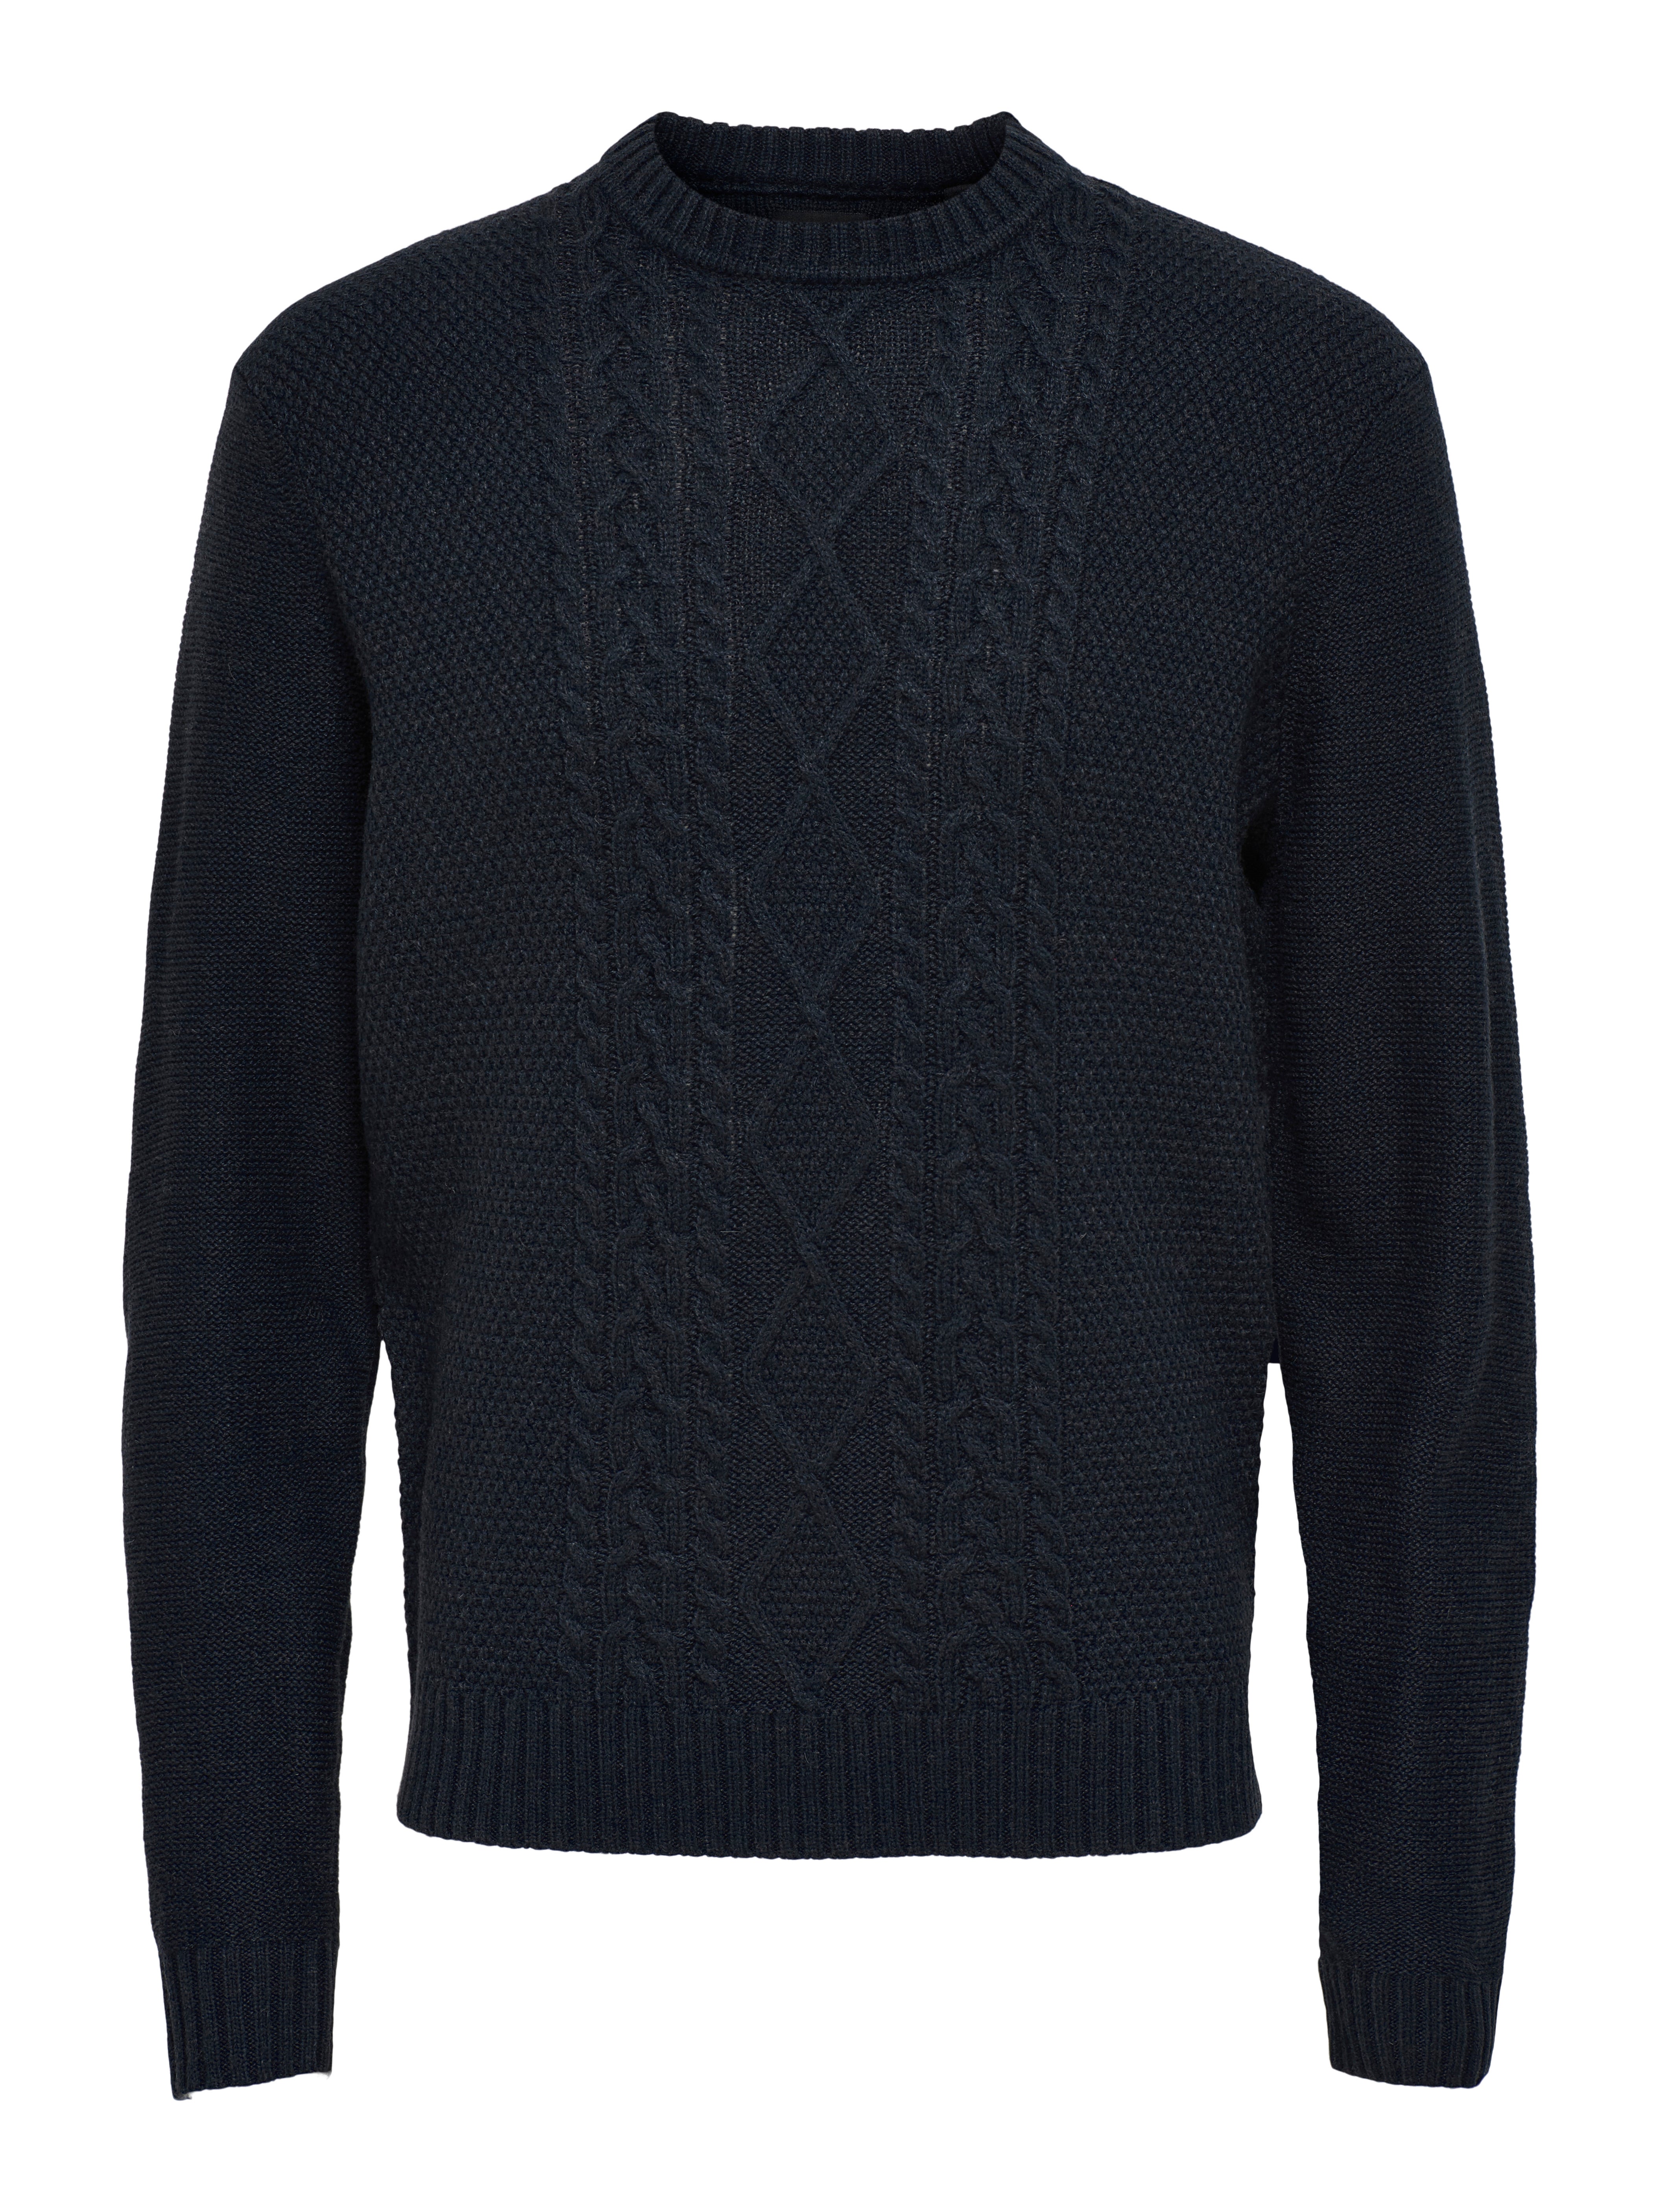 RDHOPE-Men Autumn Soft V Neck Knitted Casual Loose Patterned Sweaters